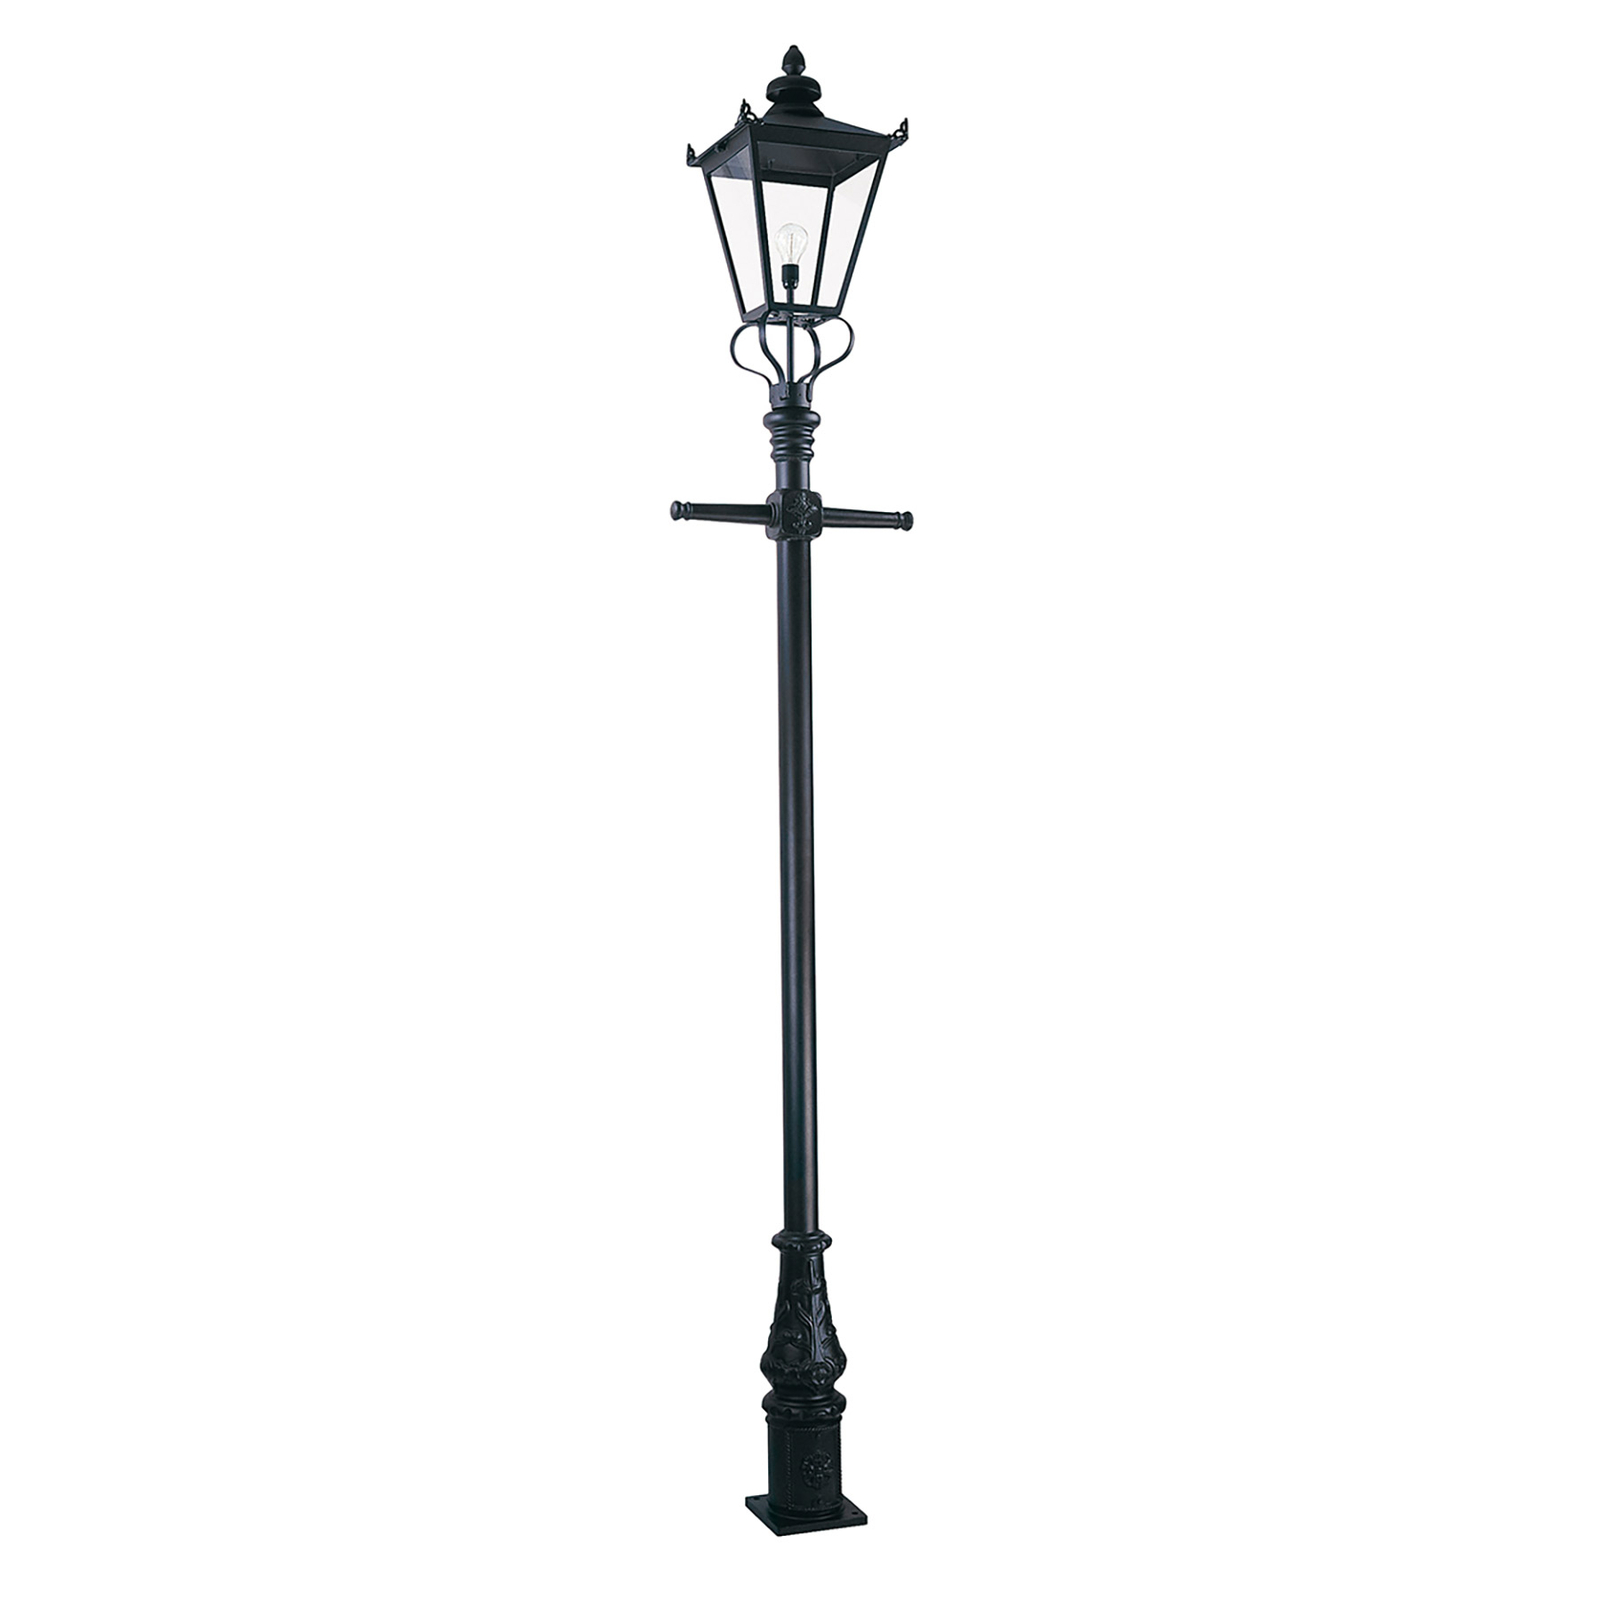 Wilmslow lamp post black one-bulb height 330 cm